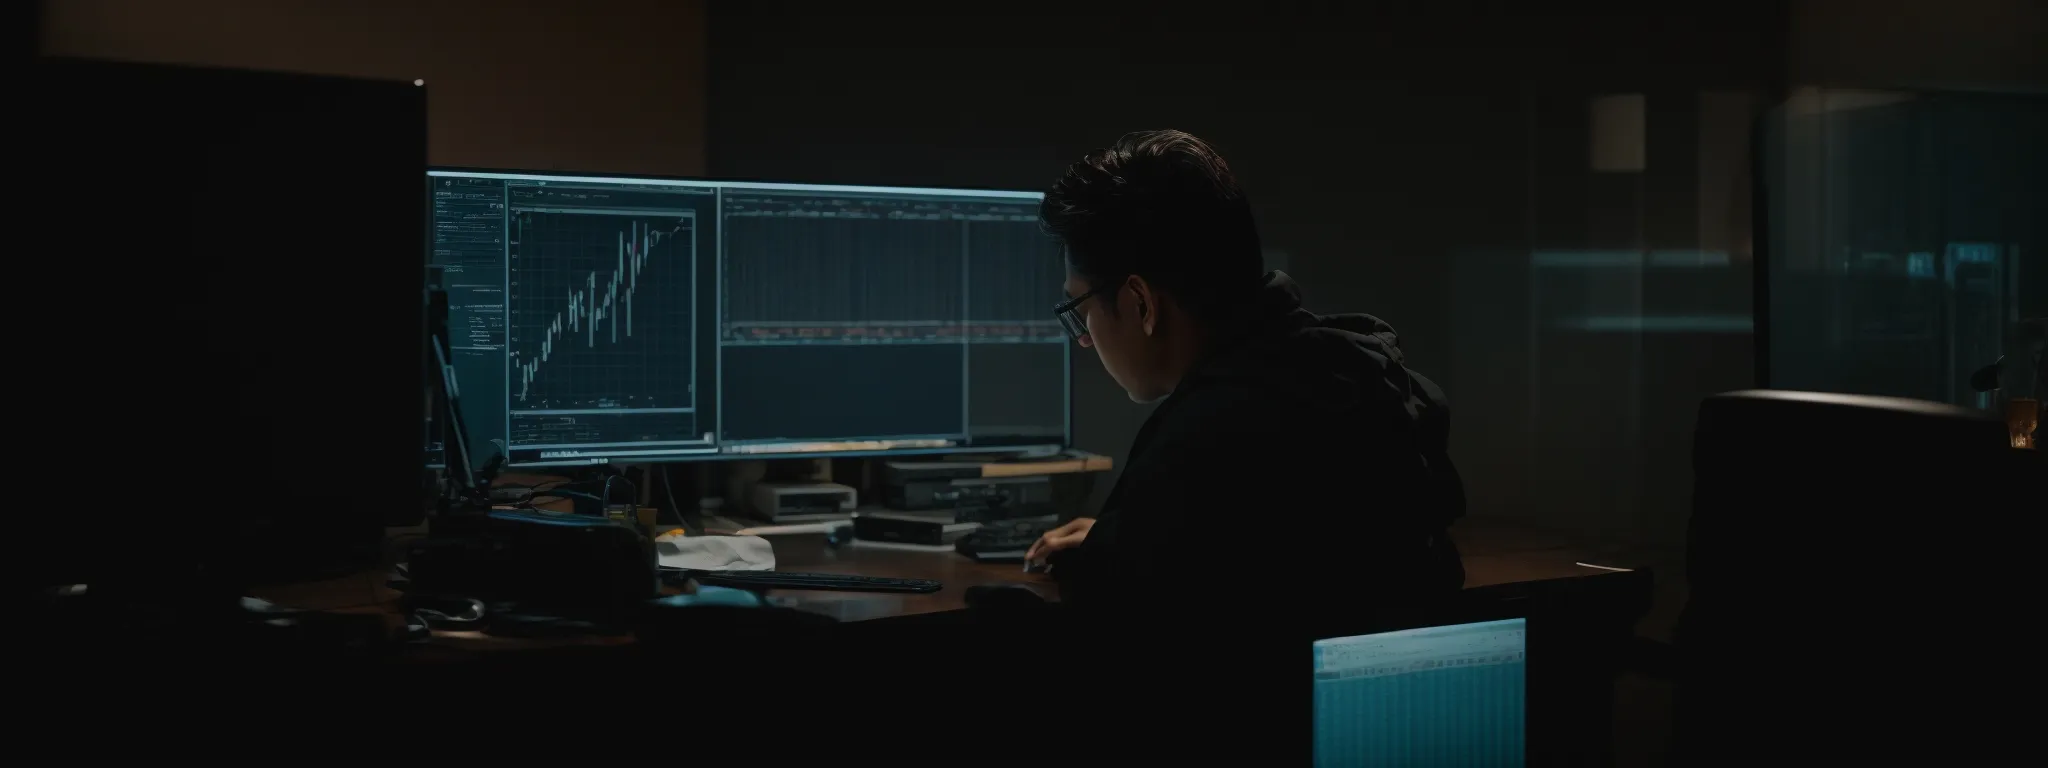 a focused individual reviewing intricate analytics on a computer screen.